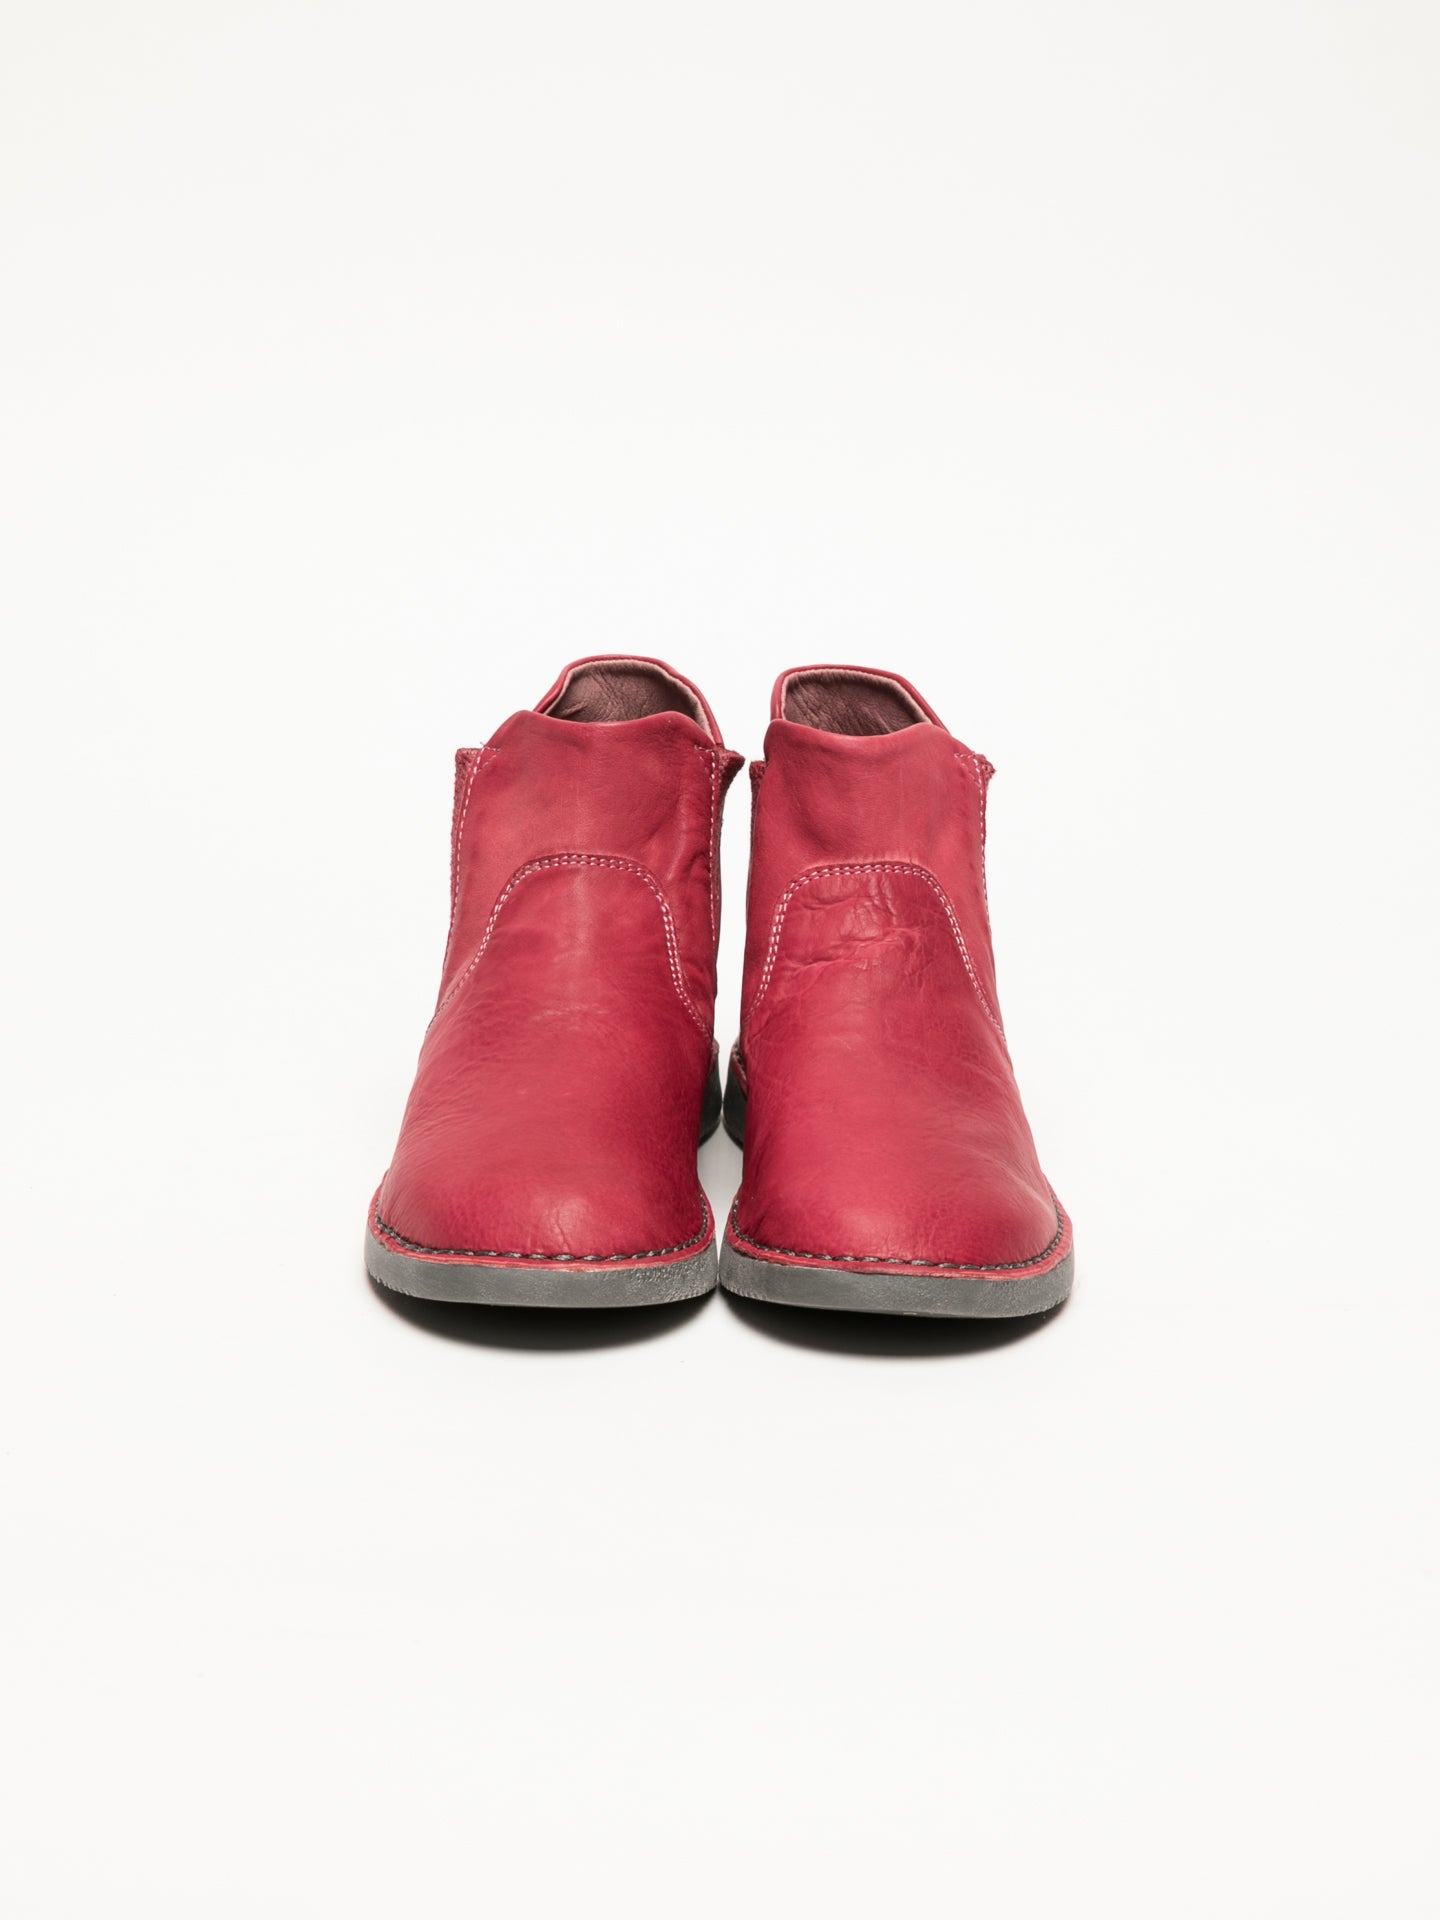 Softinos Red Round Toe Ankle Boots